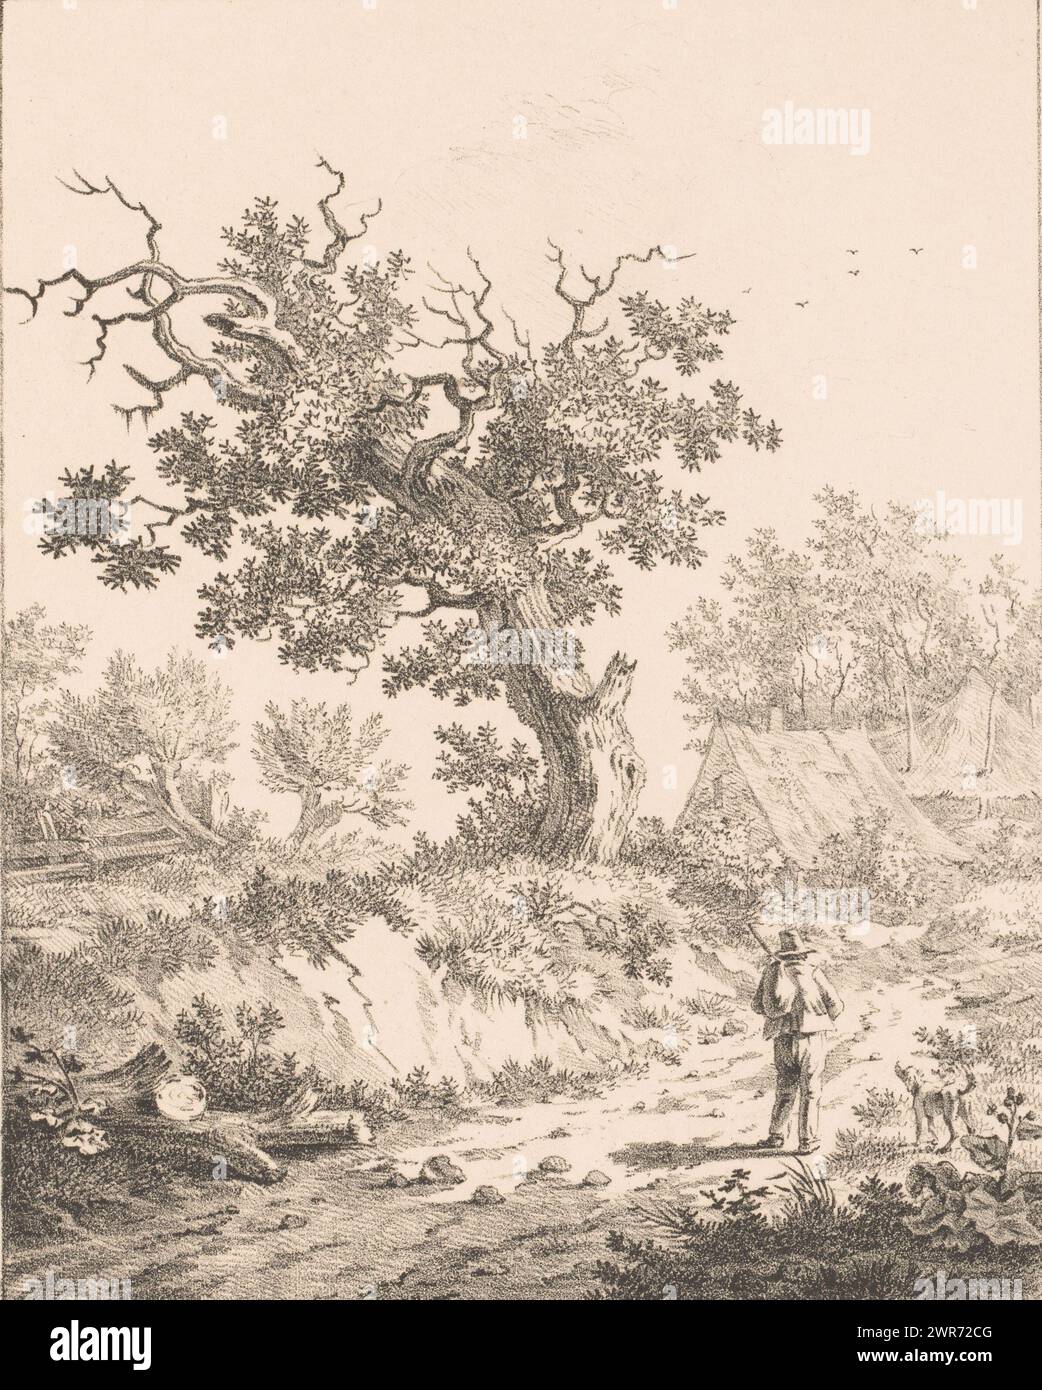 Landscape with man and dog, A man with a duffel bag and a dog walking on a path with an oak tree on the verge. In the background two houses., print maker: Gerrit Adrianus van Oosterhoudt, after own design by: Gerrit Adrianus van Oosterhoudt, Netherlands, 1809 - 1834, paper, height 293 mm × width 241 mm, print Stock Photo